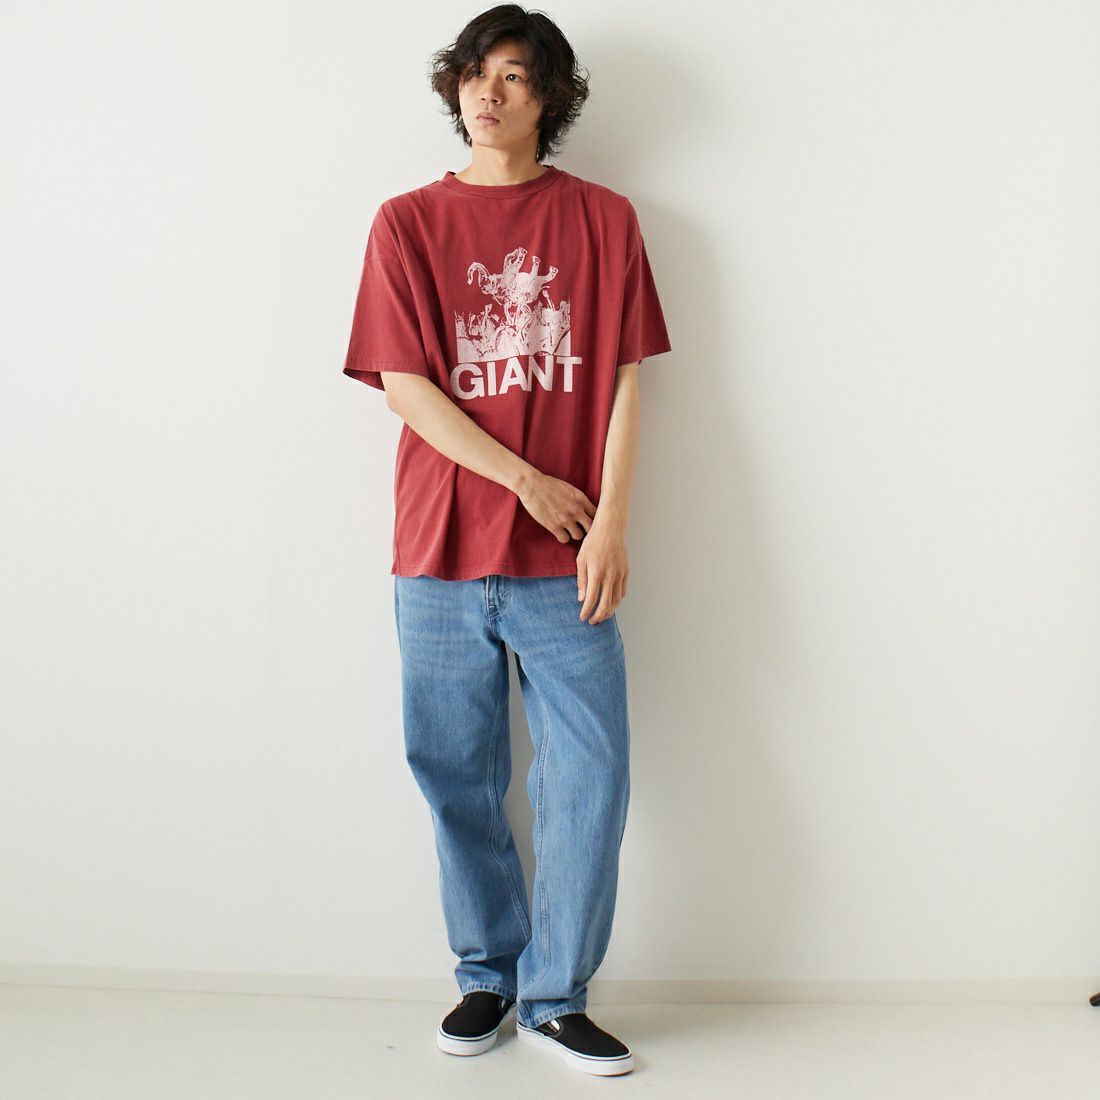 REMI RELIEF [レミレリーフ] 別注 20天竺プリントTシャツ GIANT [RN24329271-JF] RED &&モデル身長：182cm 着用サイズ：M&&